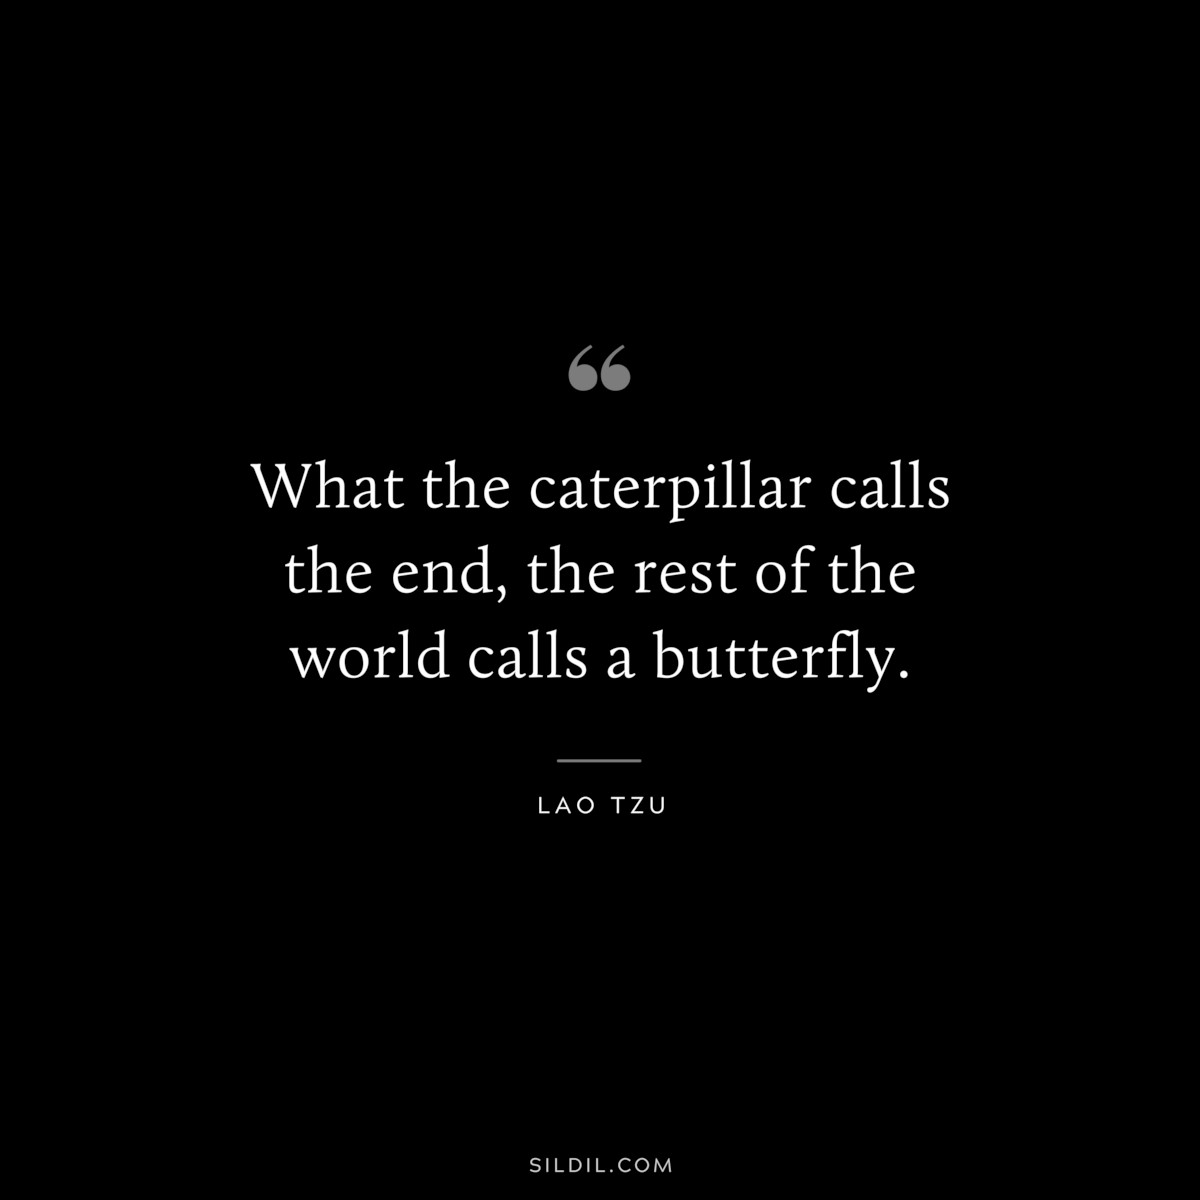 What the caterpillar calls the end, the rest of the world calls a butterfly. ― Lao Tzu